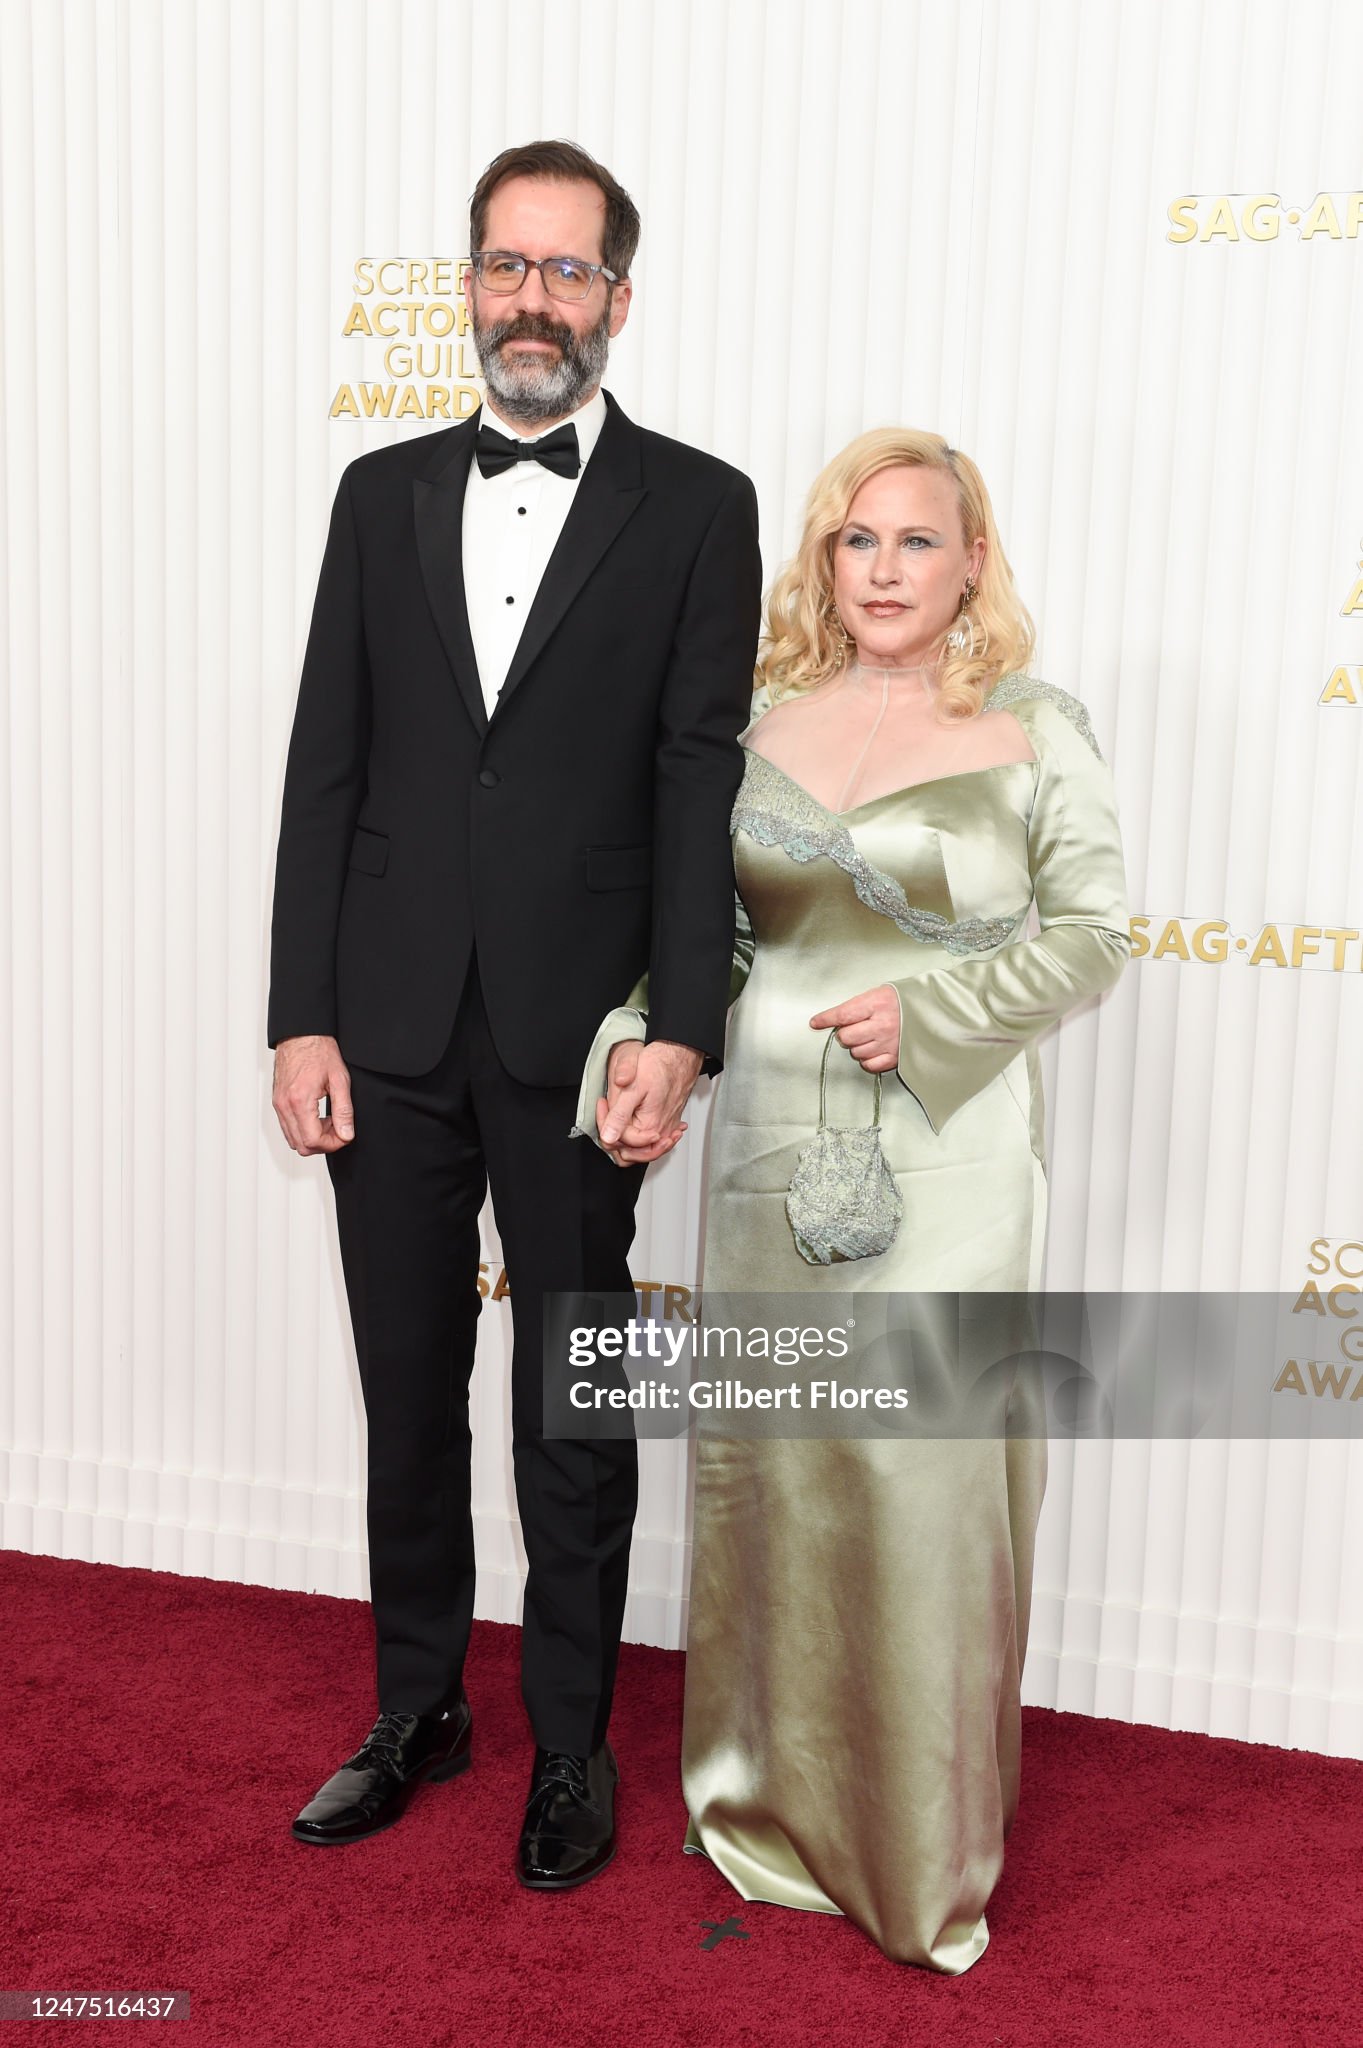 eric-white-and-patricia-arquette-at-the-29th-annual-screen-actors-guild-awards-held-at-the.jpg